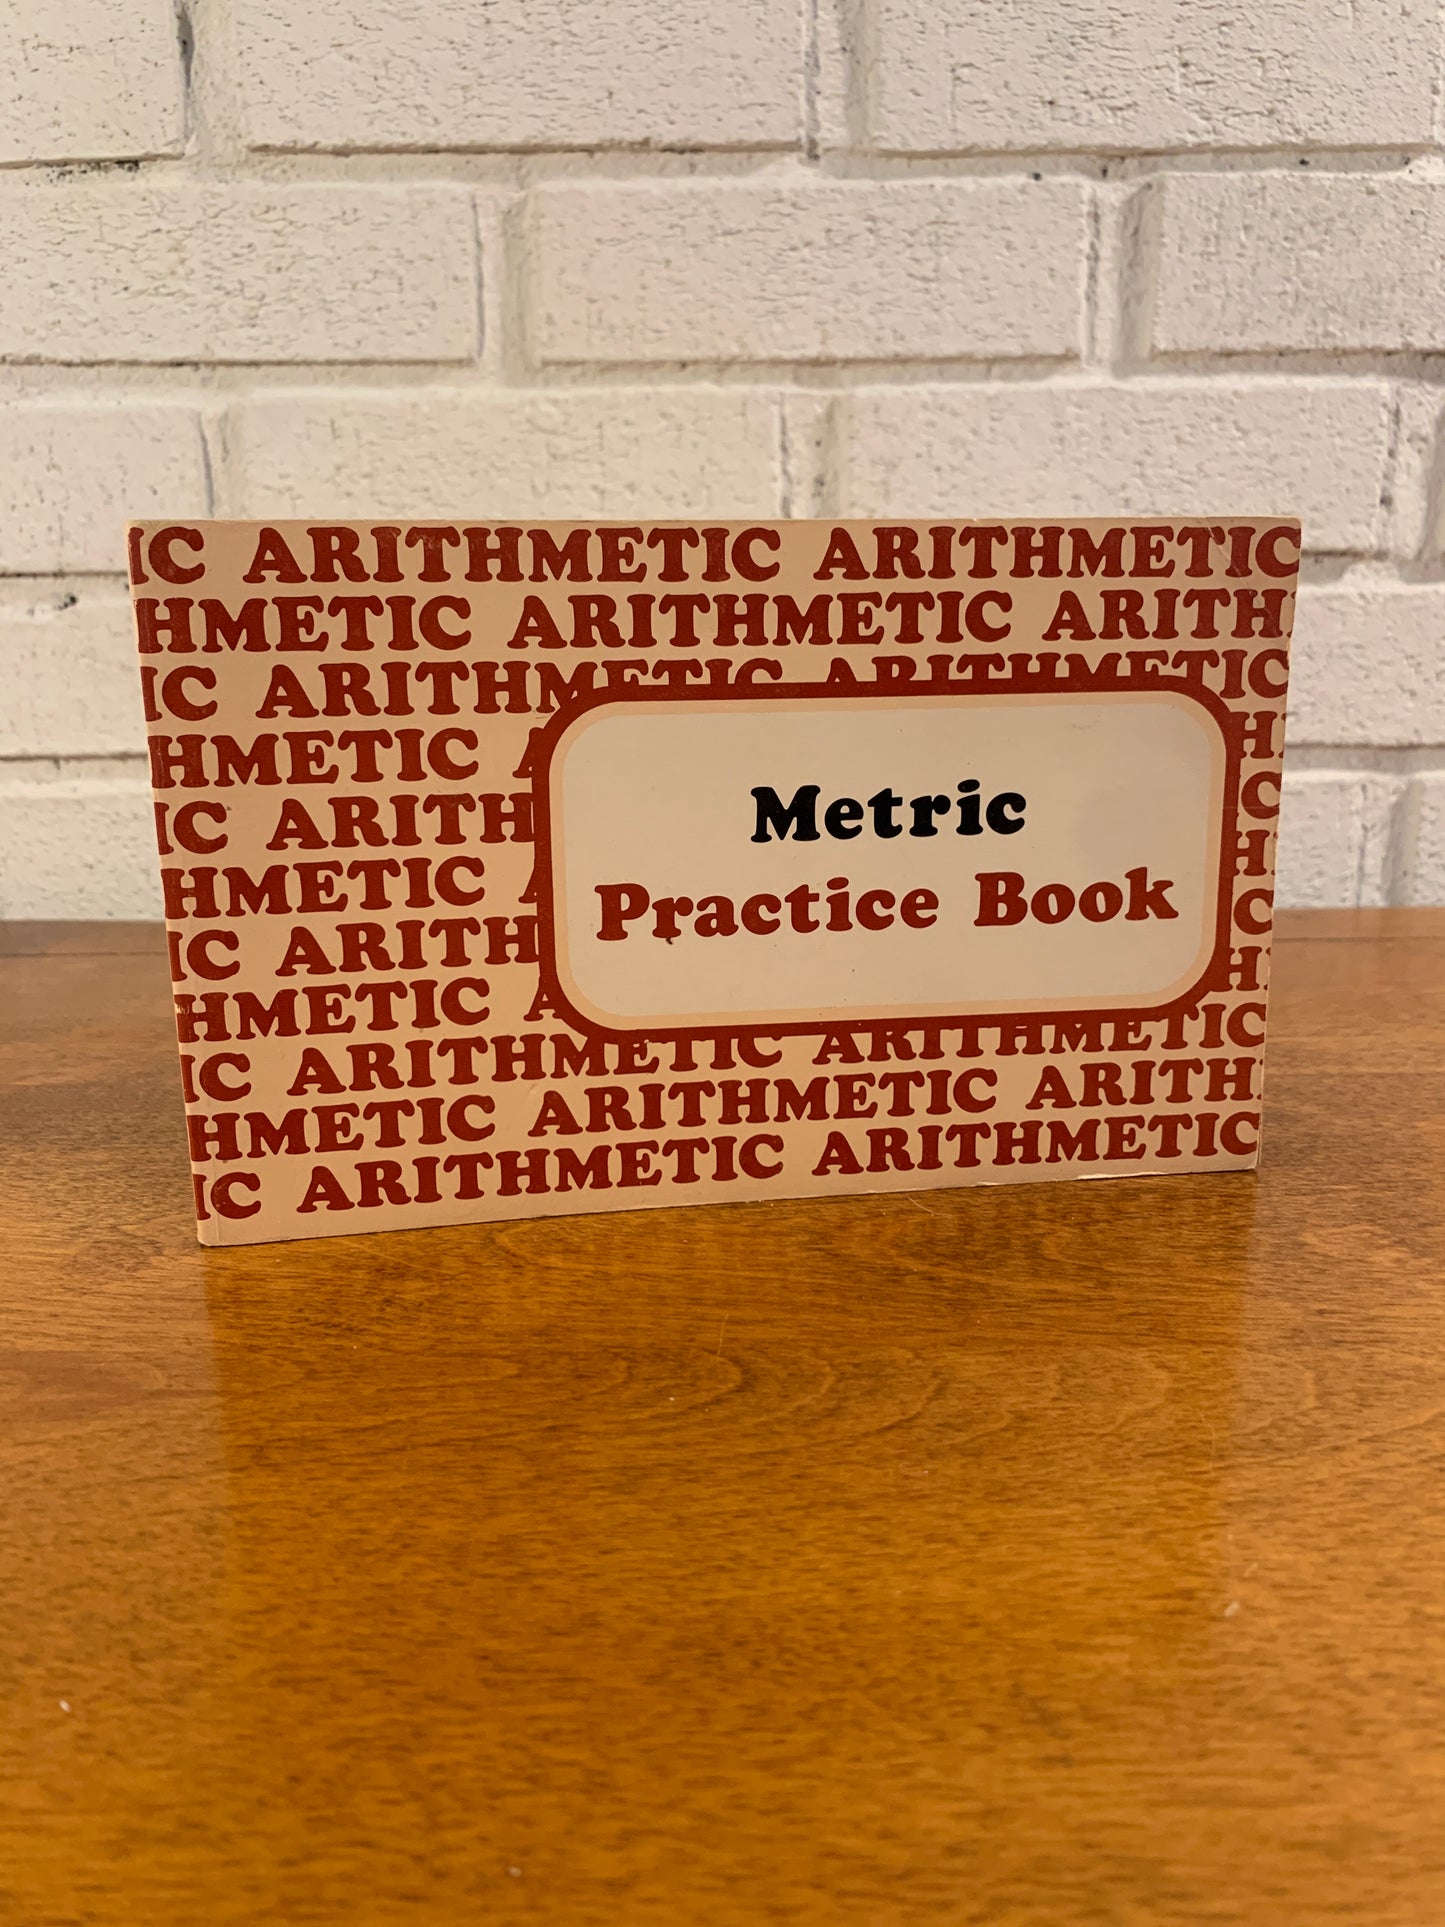 Metric Practice Book, Ann Cassill Sofge, An Essential Learning Product, 1980